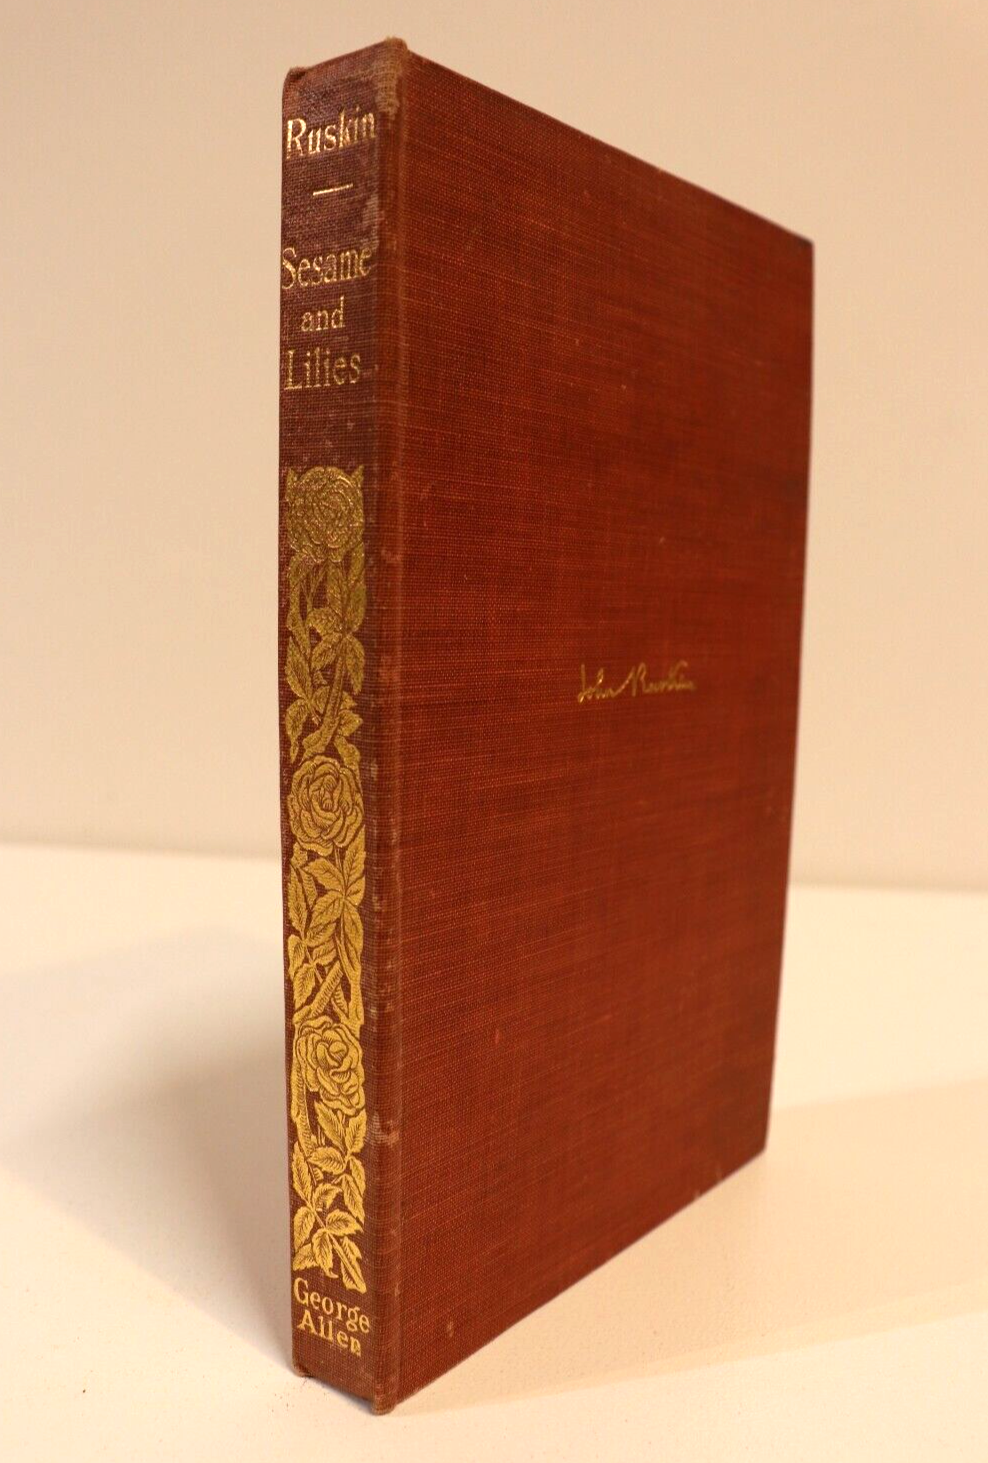 Sesame and Lilies by John Ruskin - 1905 - Antique Philosophy Book